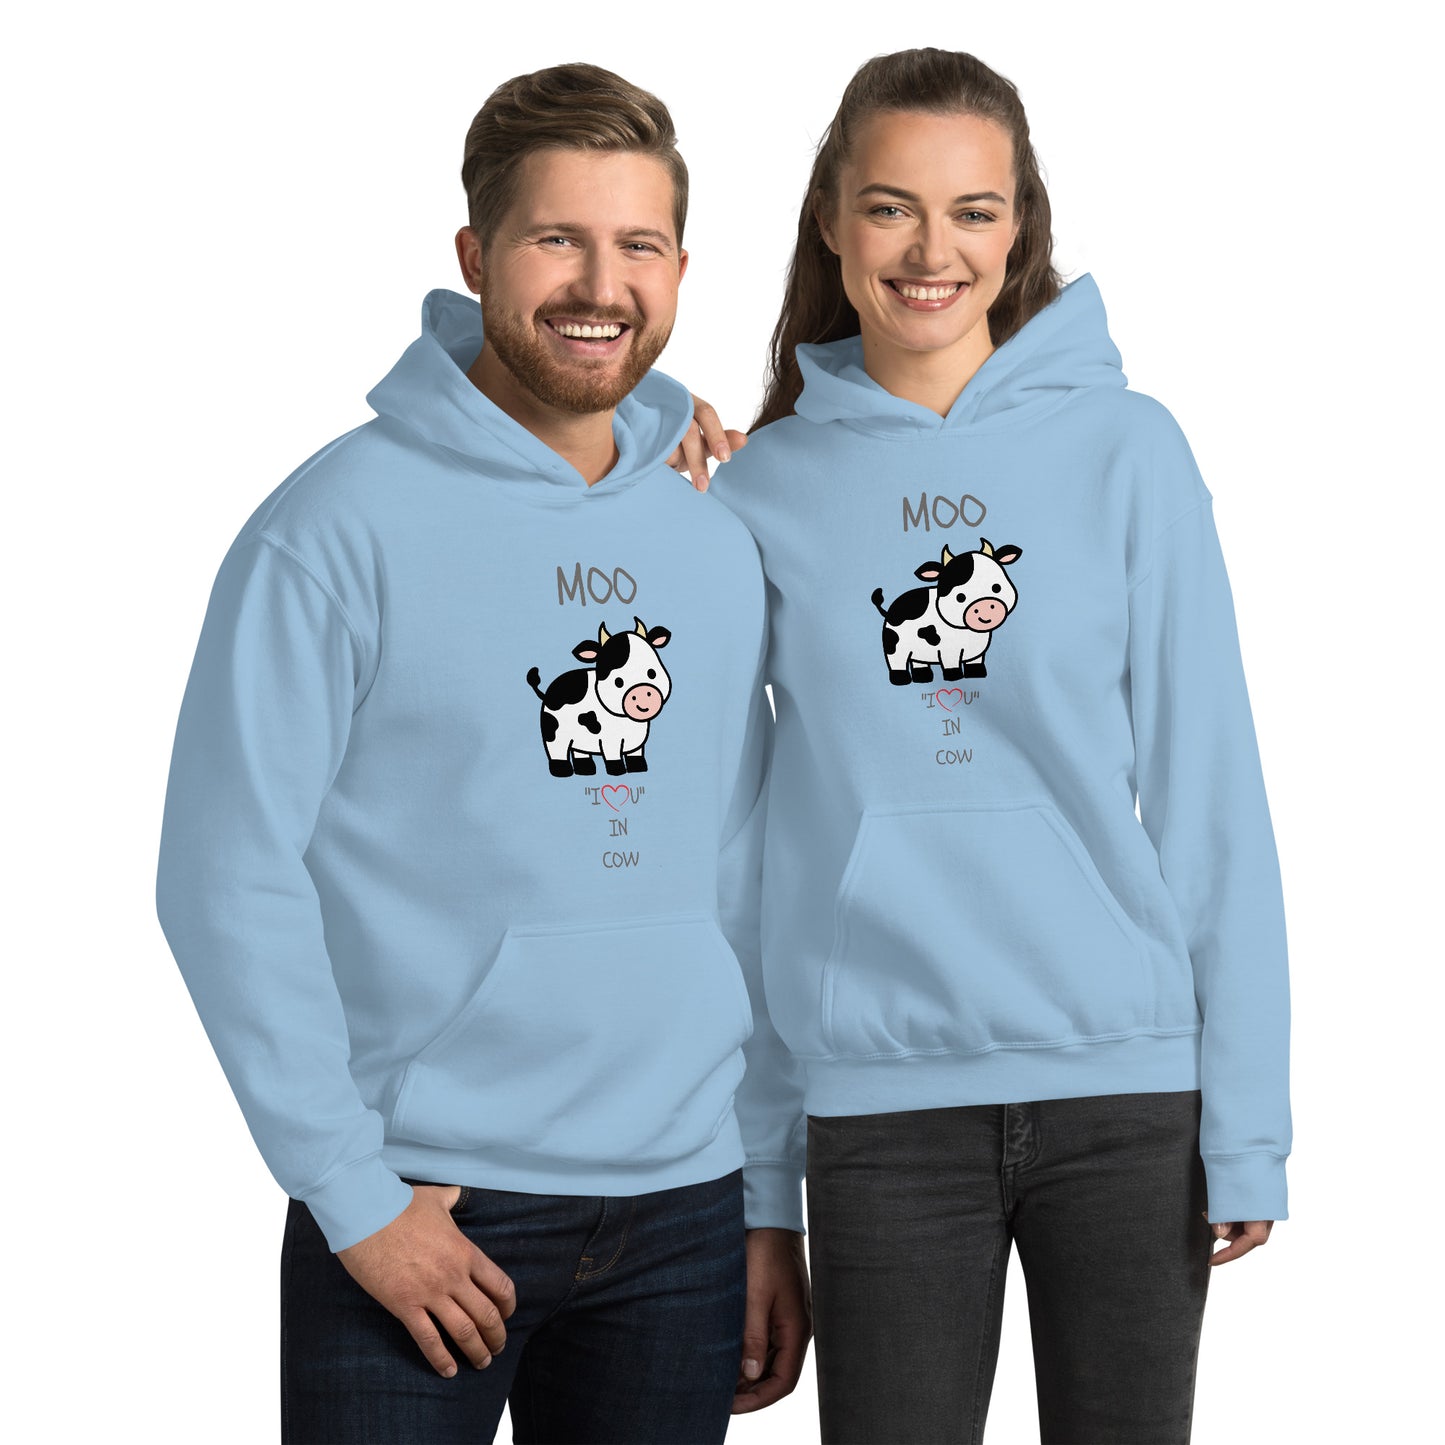 MOO "I LOVE YOU" IN COW Unisex Hoodie